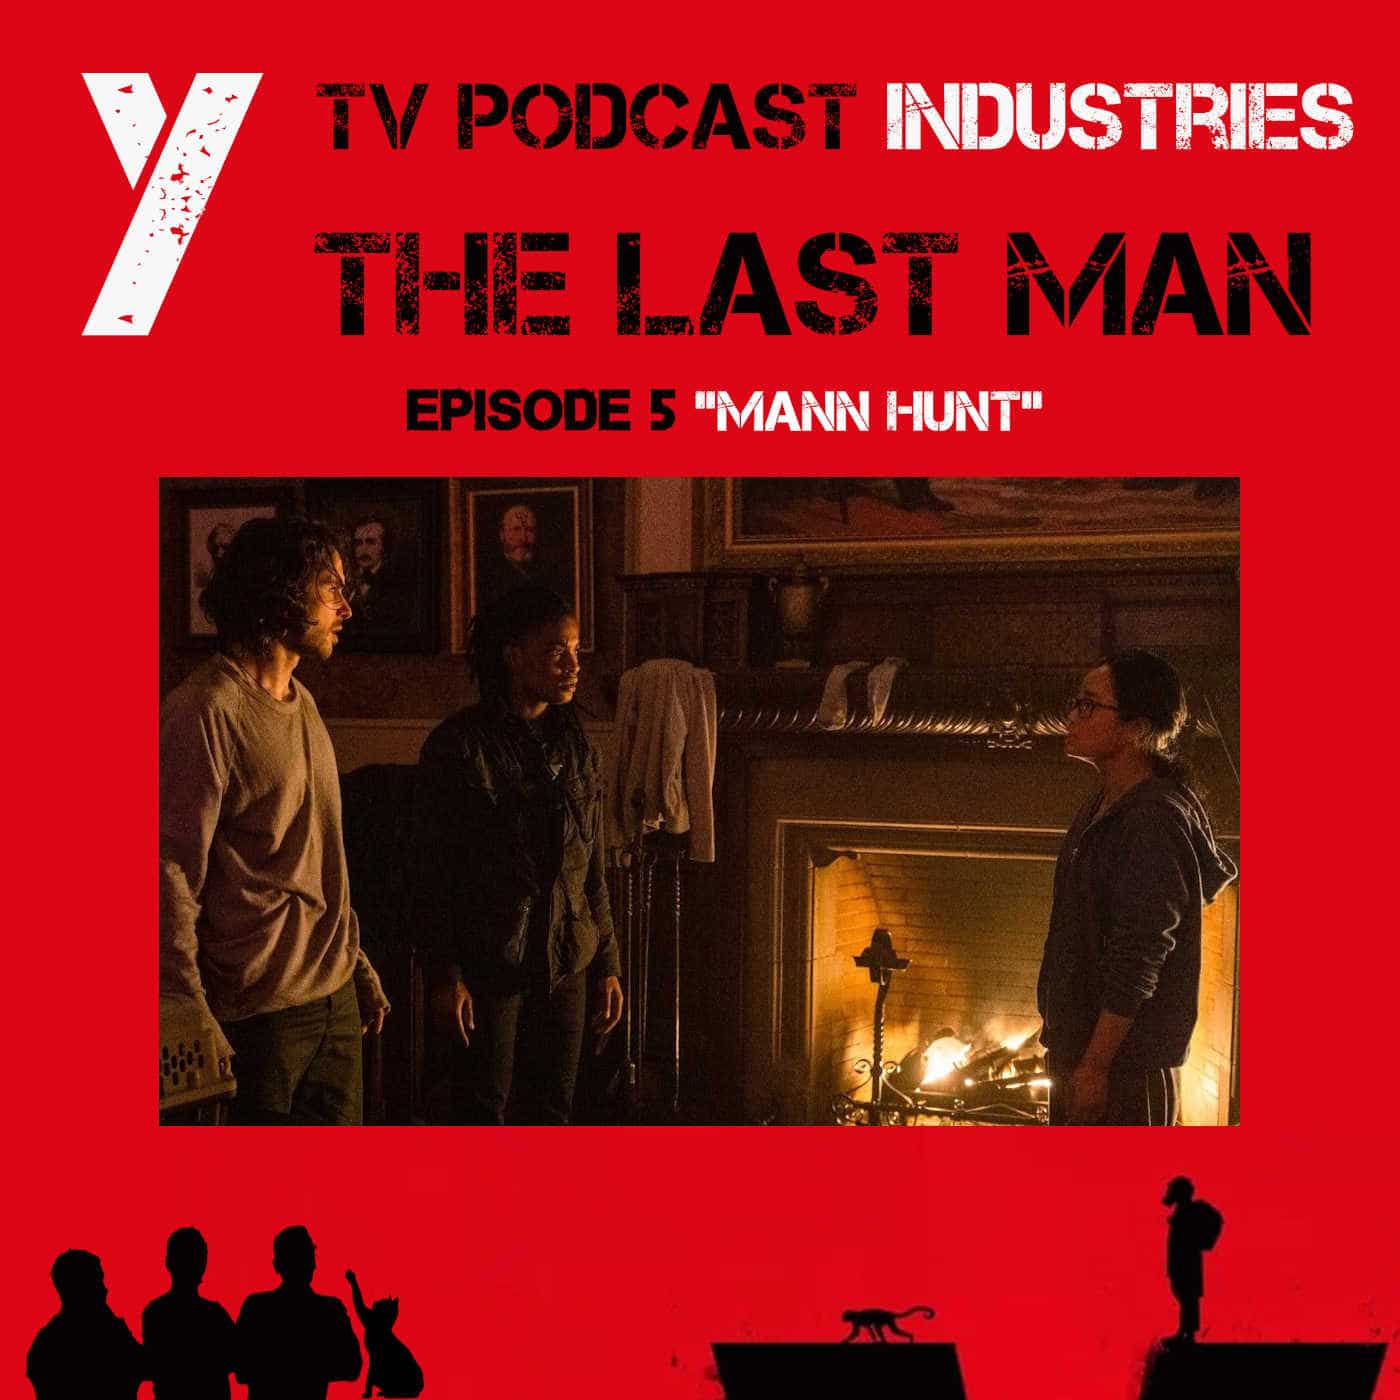 Y The Last Man Episode 5 "Mann Hunt" Podcast on TV Podcast Industries